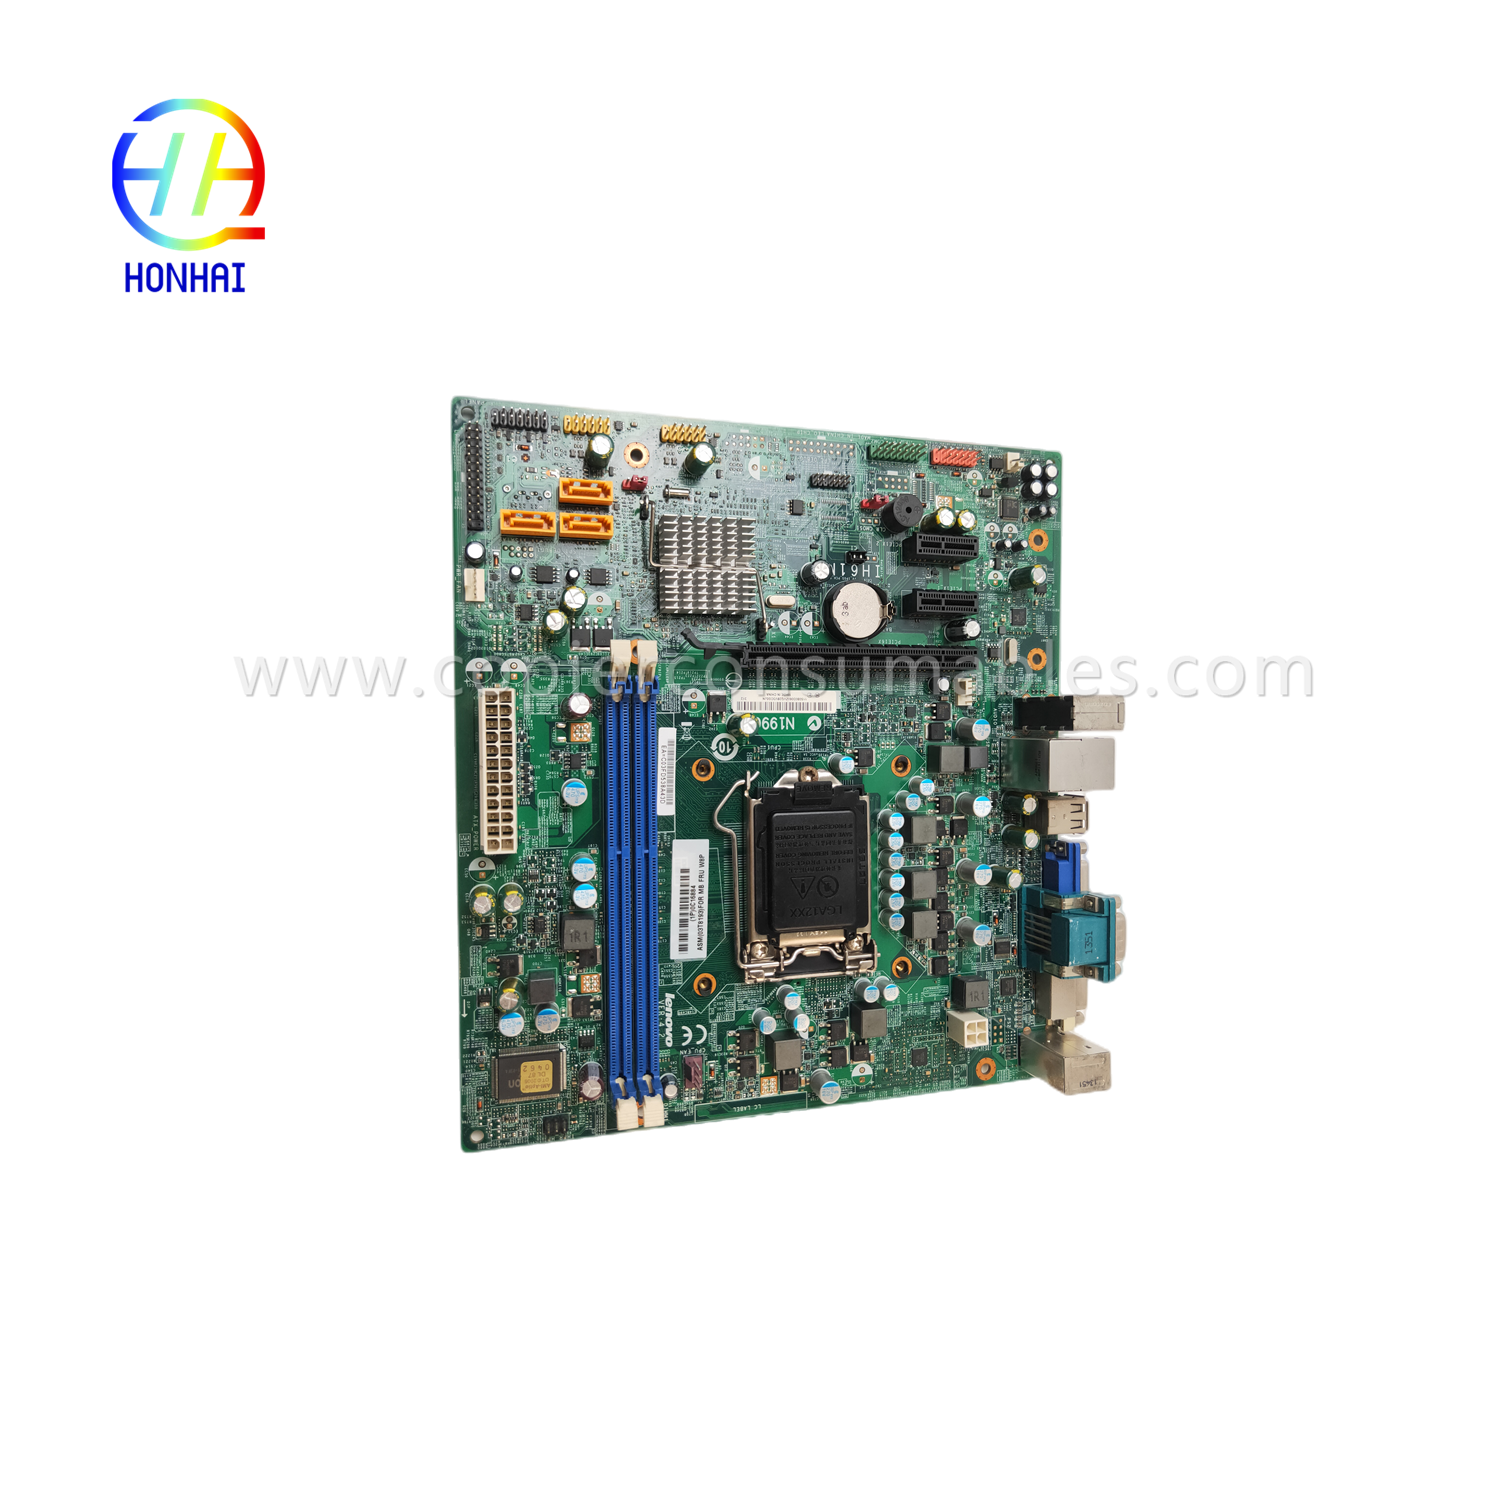 https://www.copierconsumables.com/ Motherboard-for-lenovo-thinkcentre-m72e-lga-1155-03t8193-system-board-product/